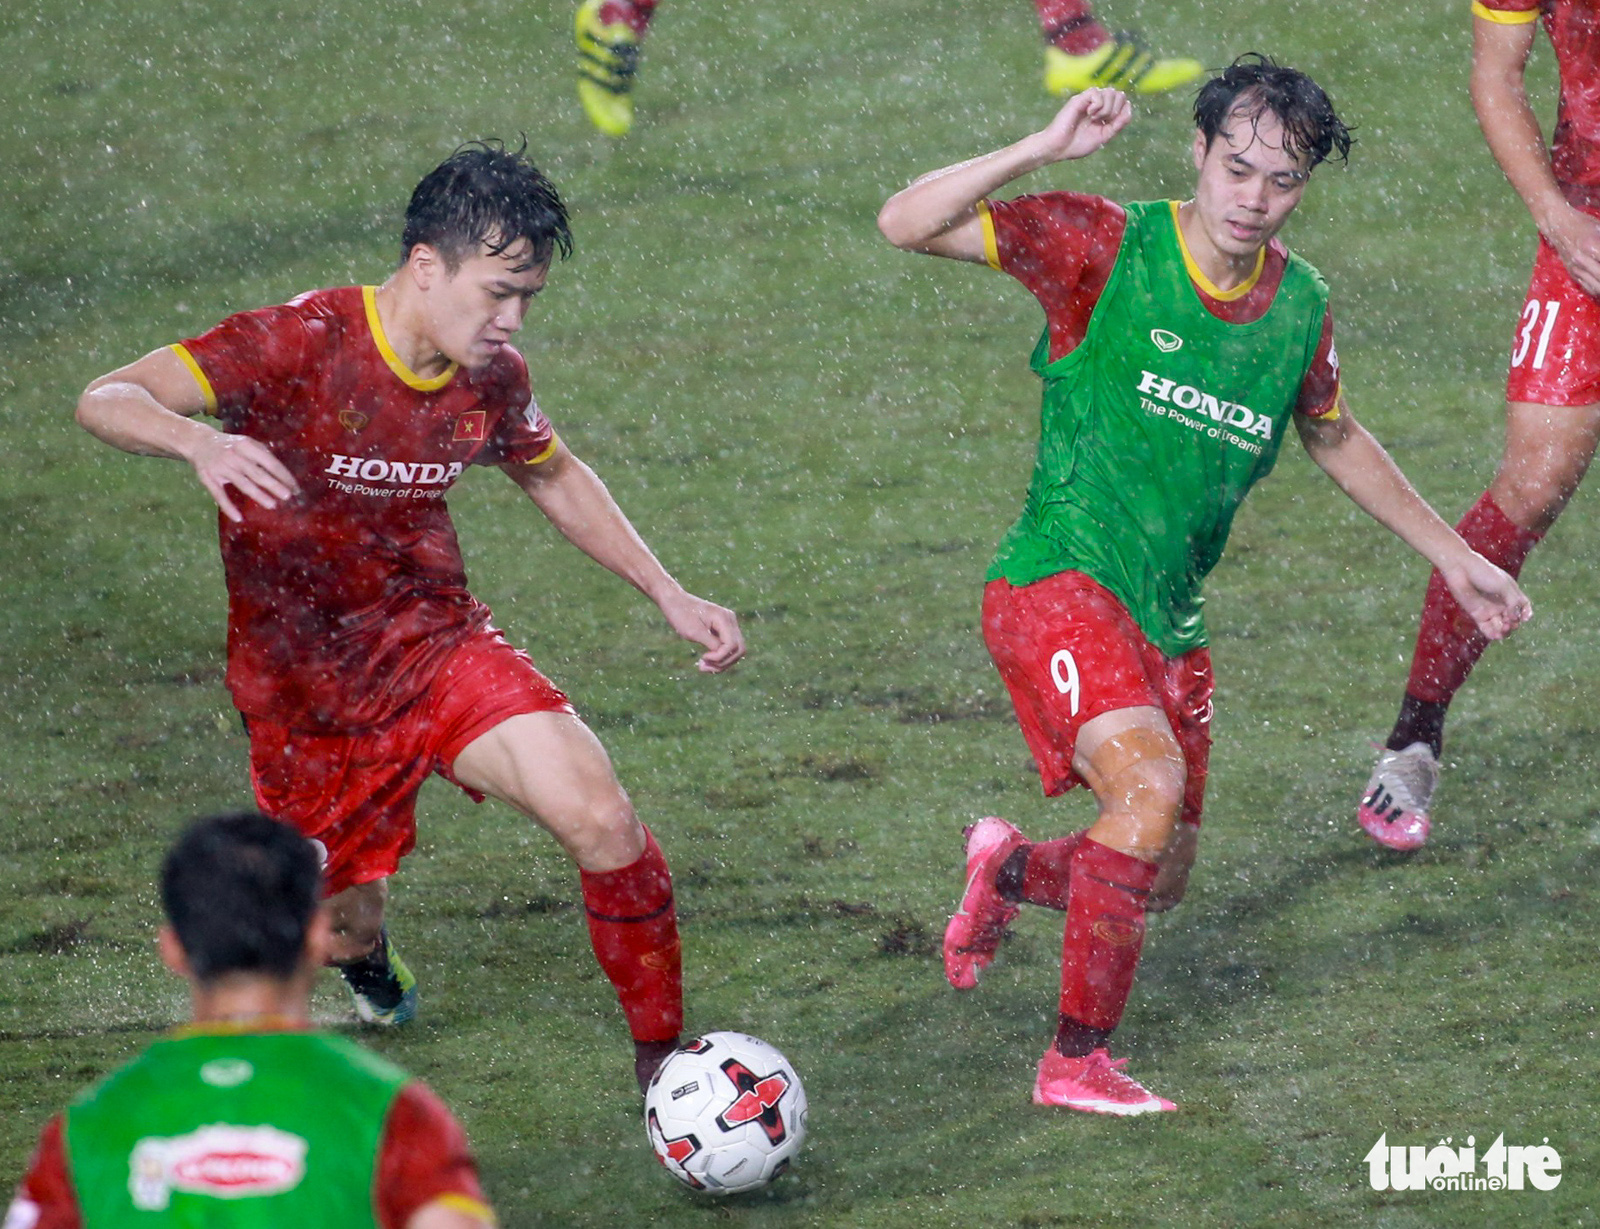 Vietnamese midfielder Nguyen Hoang Duc during a training session in the rain on May 15, 2021. Photo: Huu Tan / Tuoi Tre